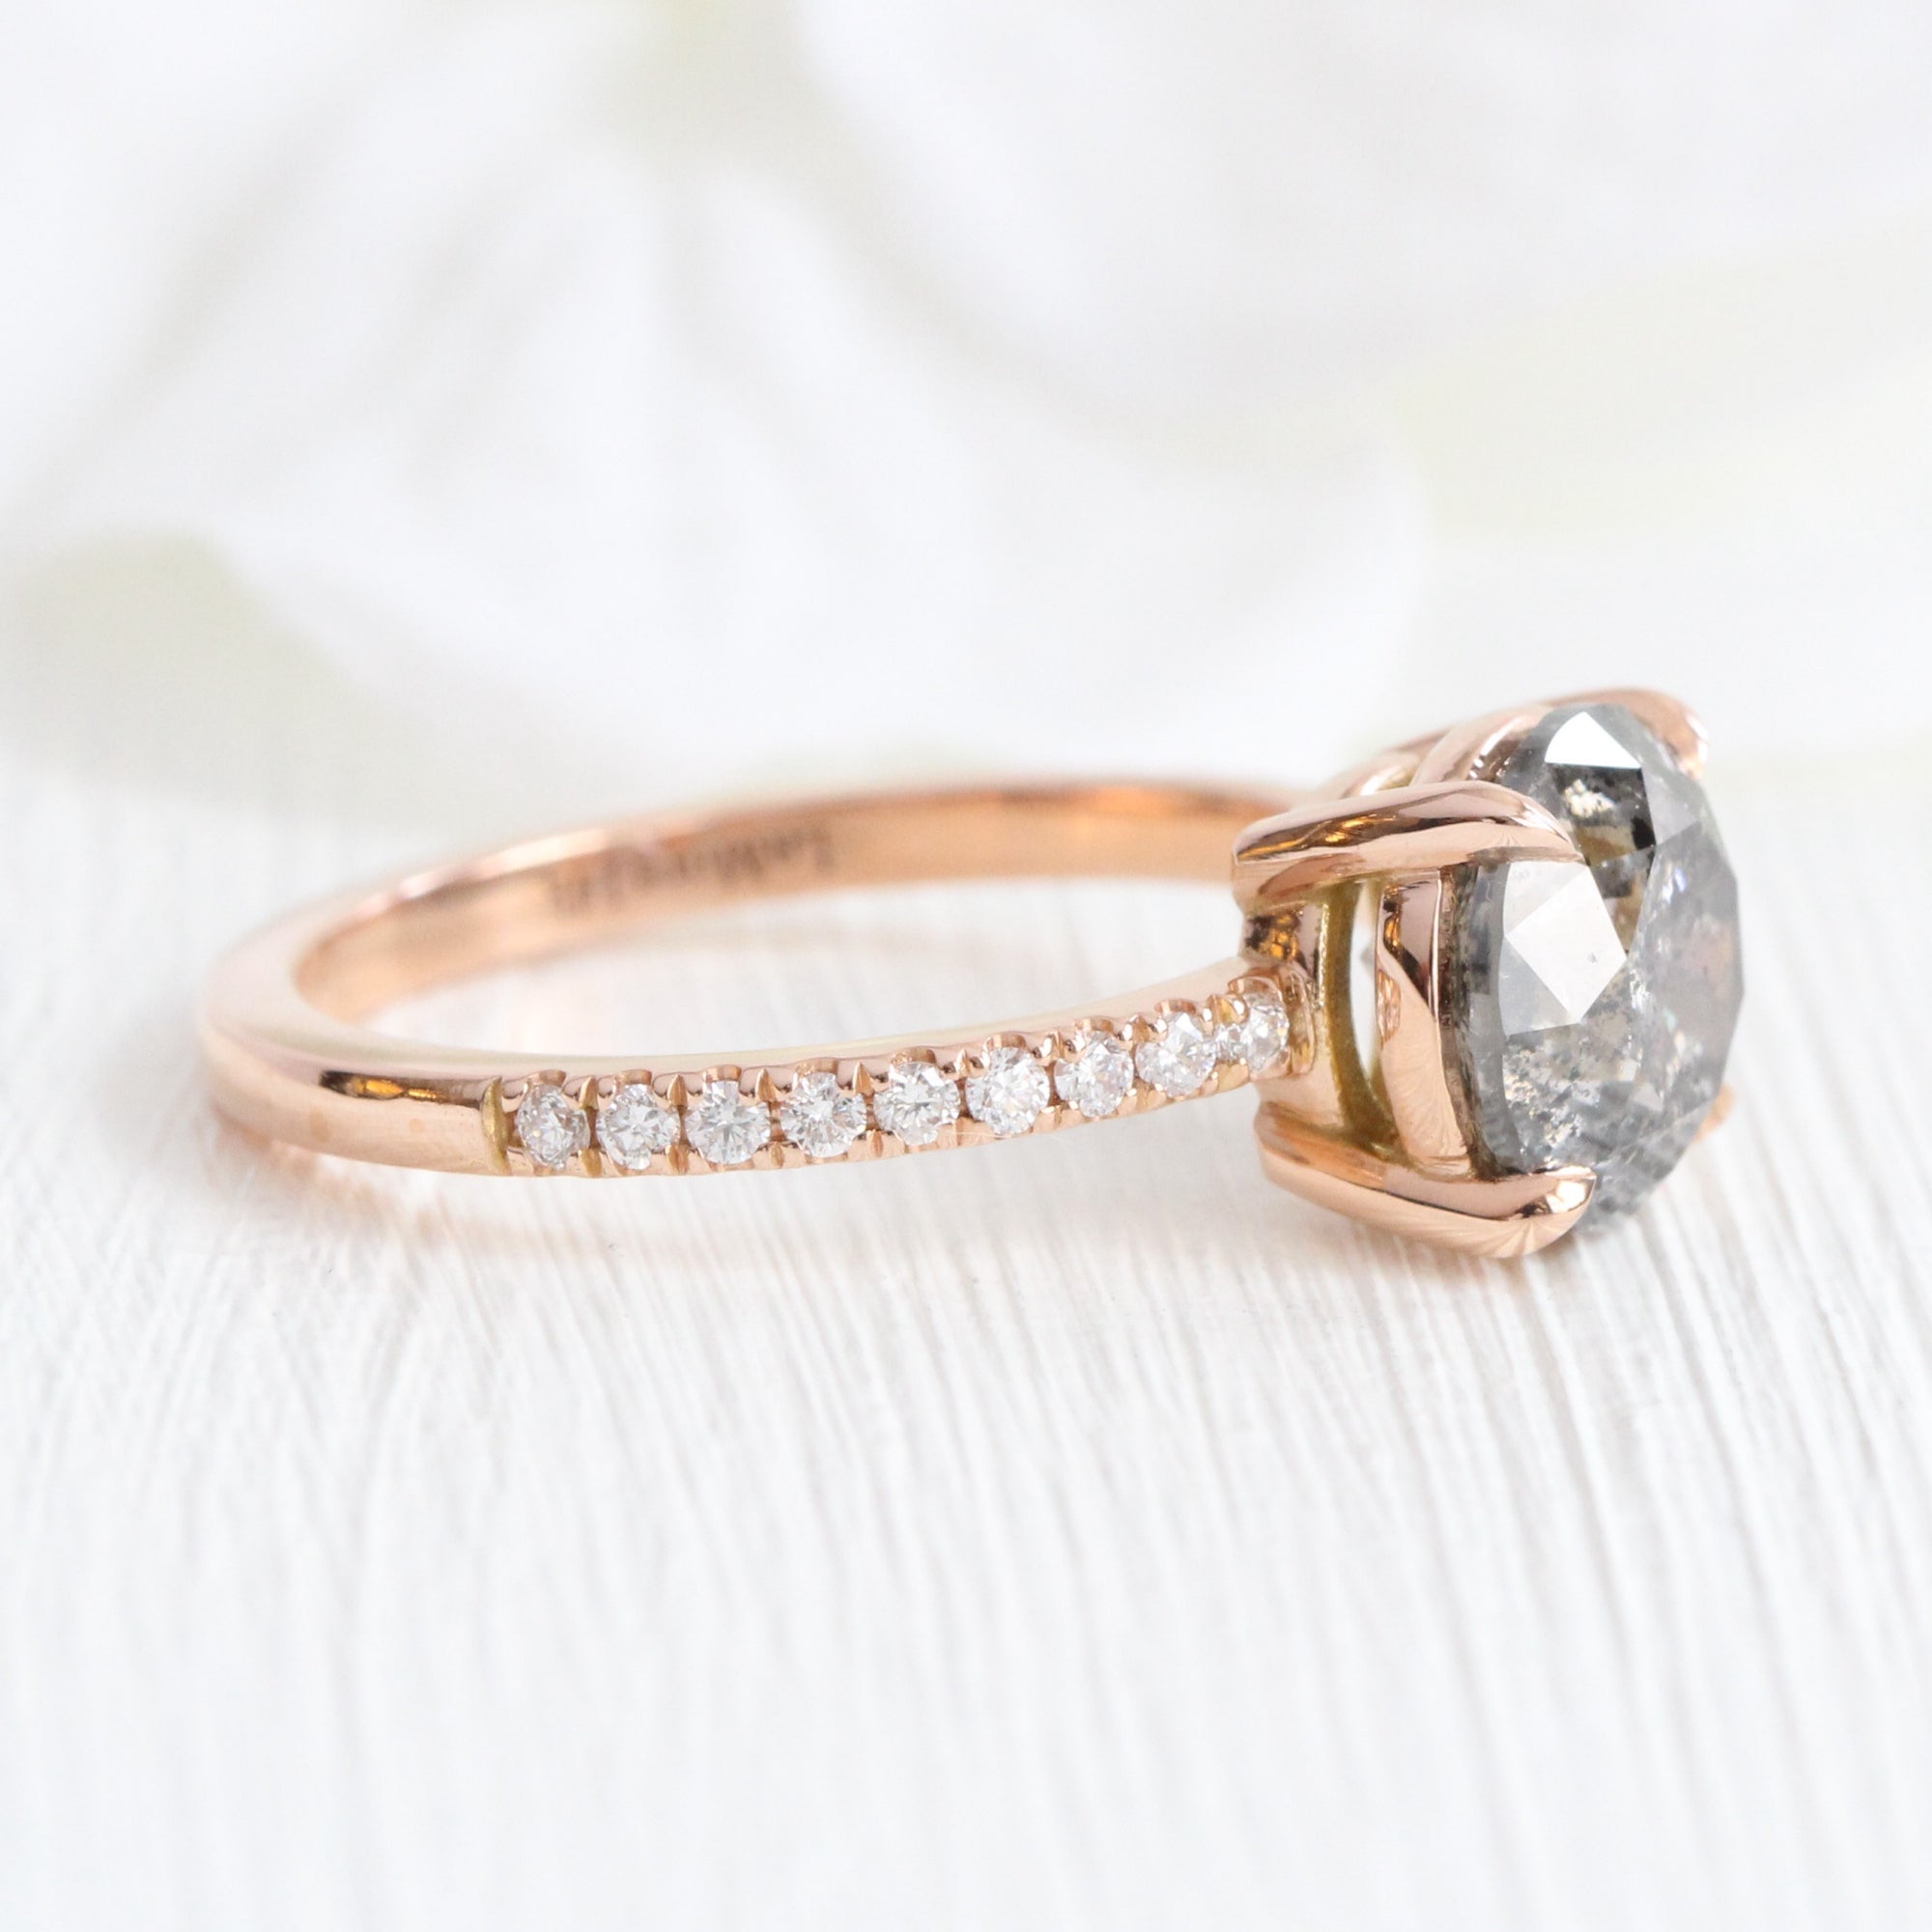 Large salt and pepper diamond ring rose gold solitaire grey diamond pave ring la more design jewelry